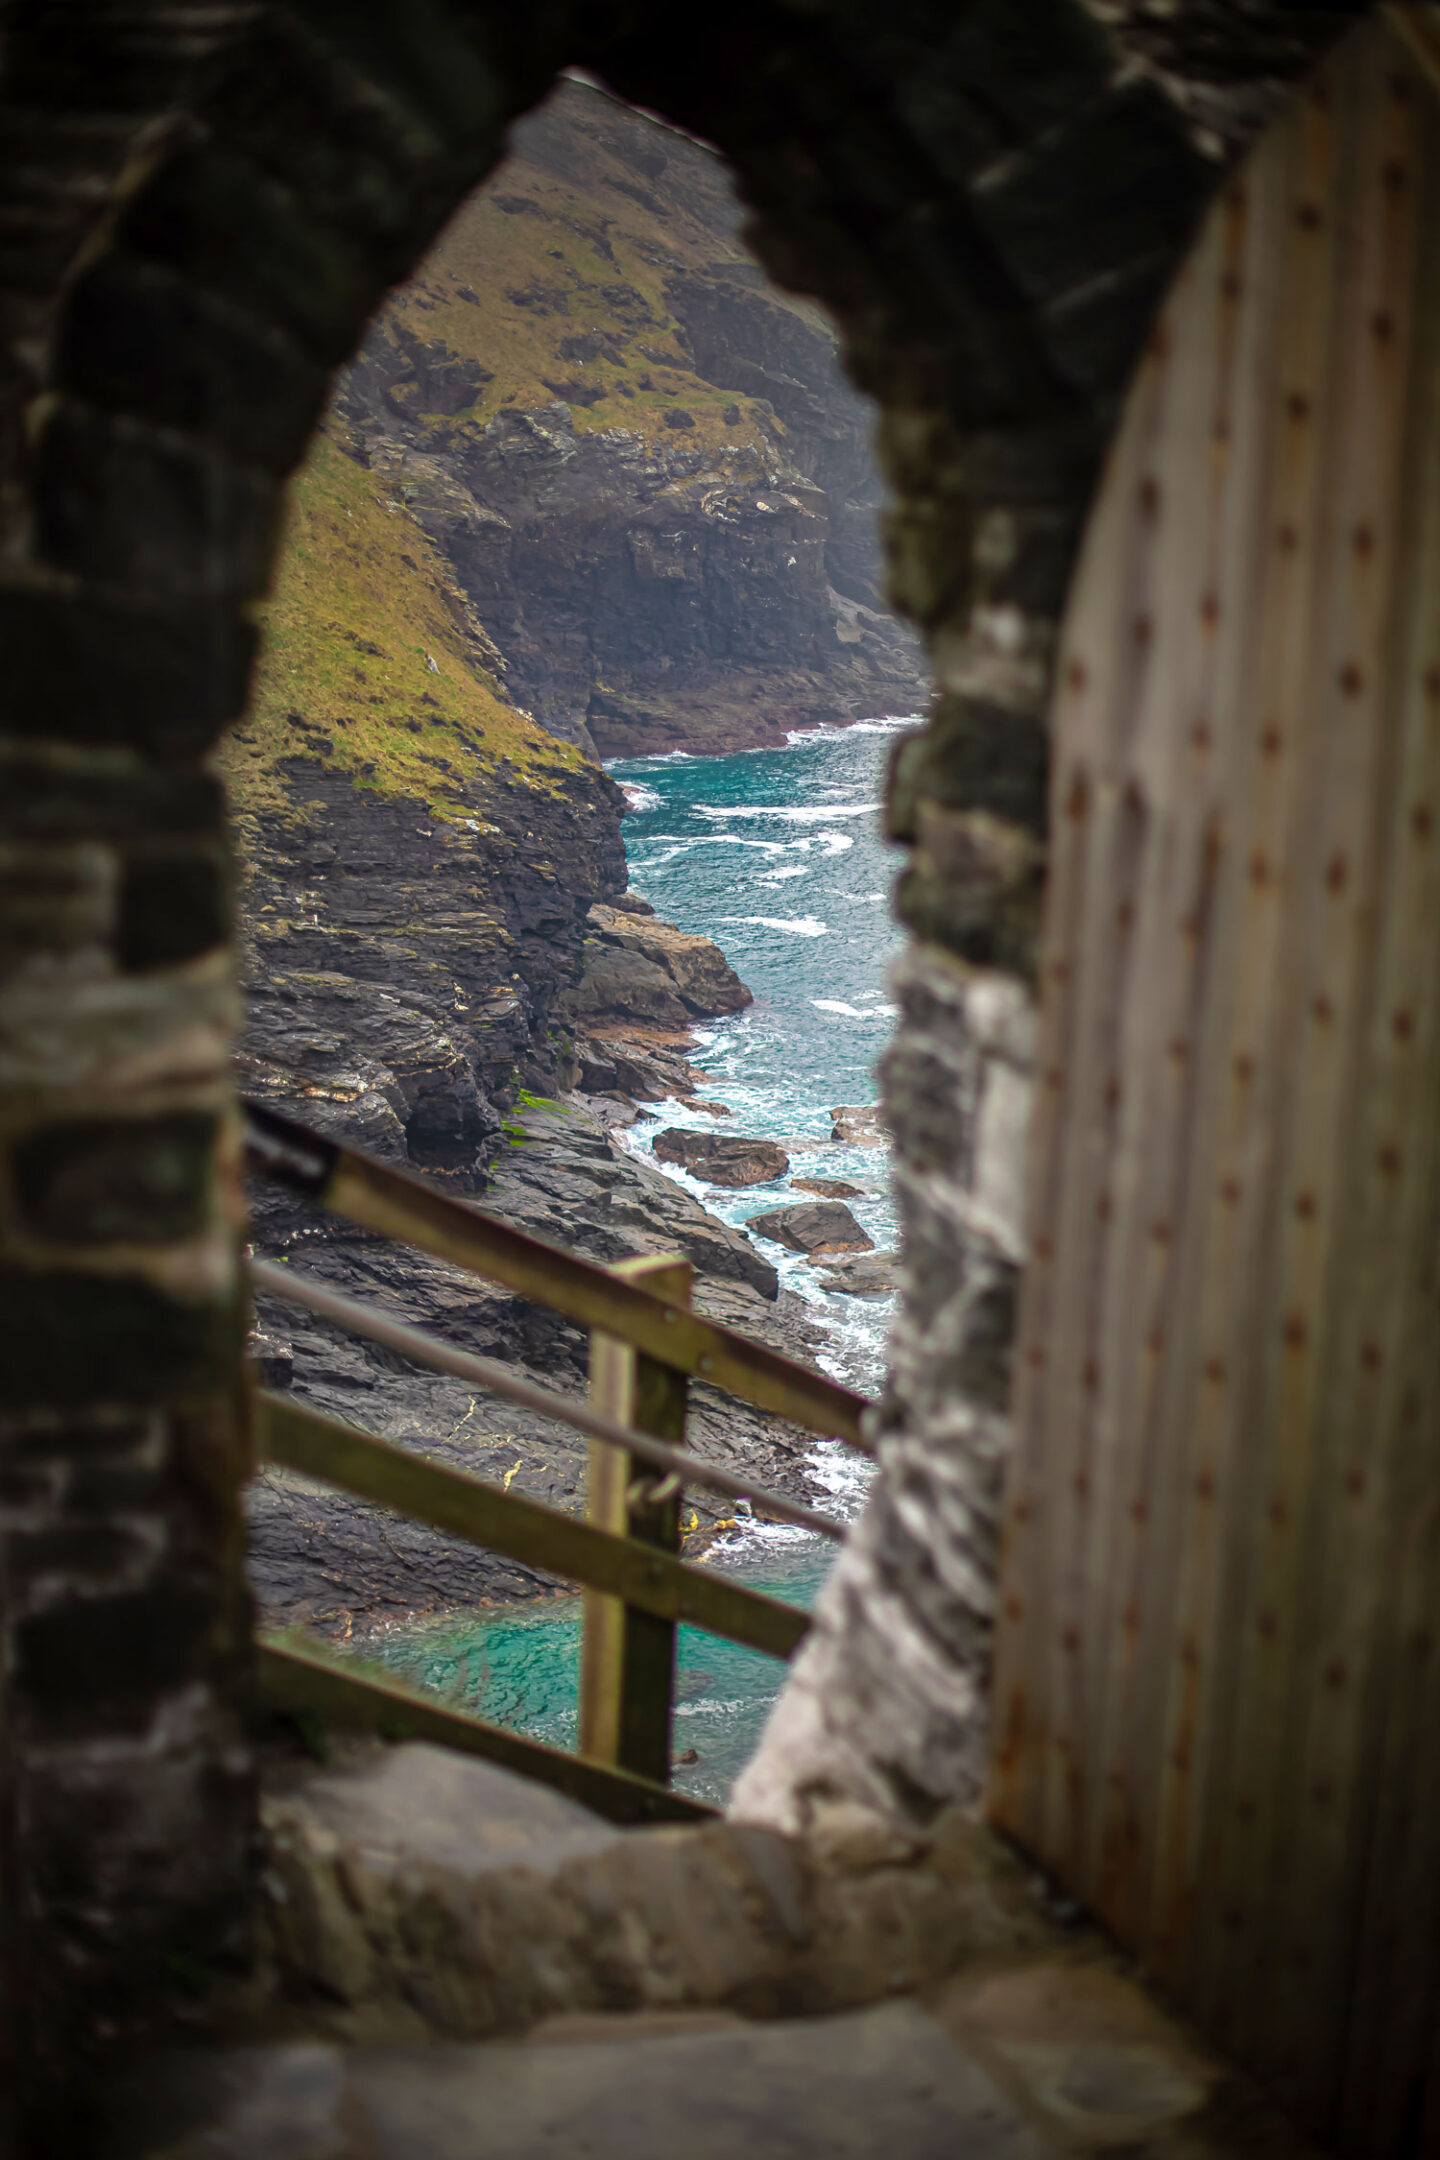 A picturesque view of the rugged Cornwall coastline, seen through the archway of an old stone structure. The turquoise waters crash against the rocky shore, framed perfectly by the weathered walls and wooden door. This perspective offers a sense of history and natural beauty, capturing the essence of Cornwall's dramatic seascape.